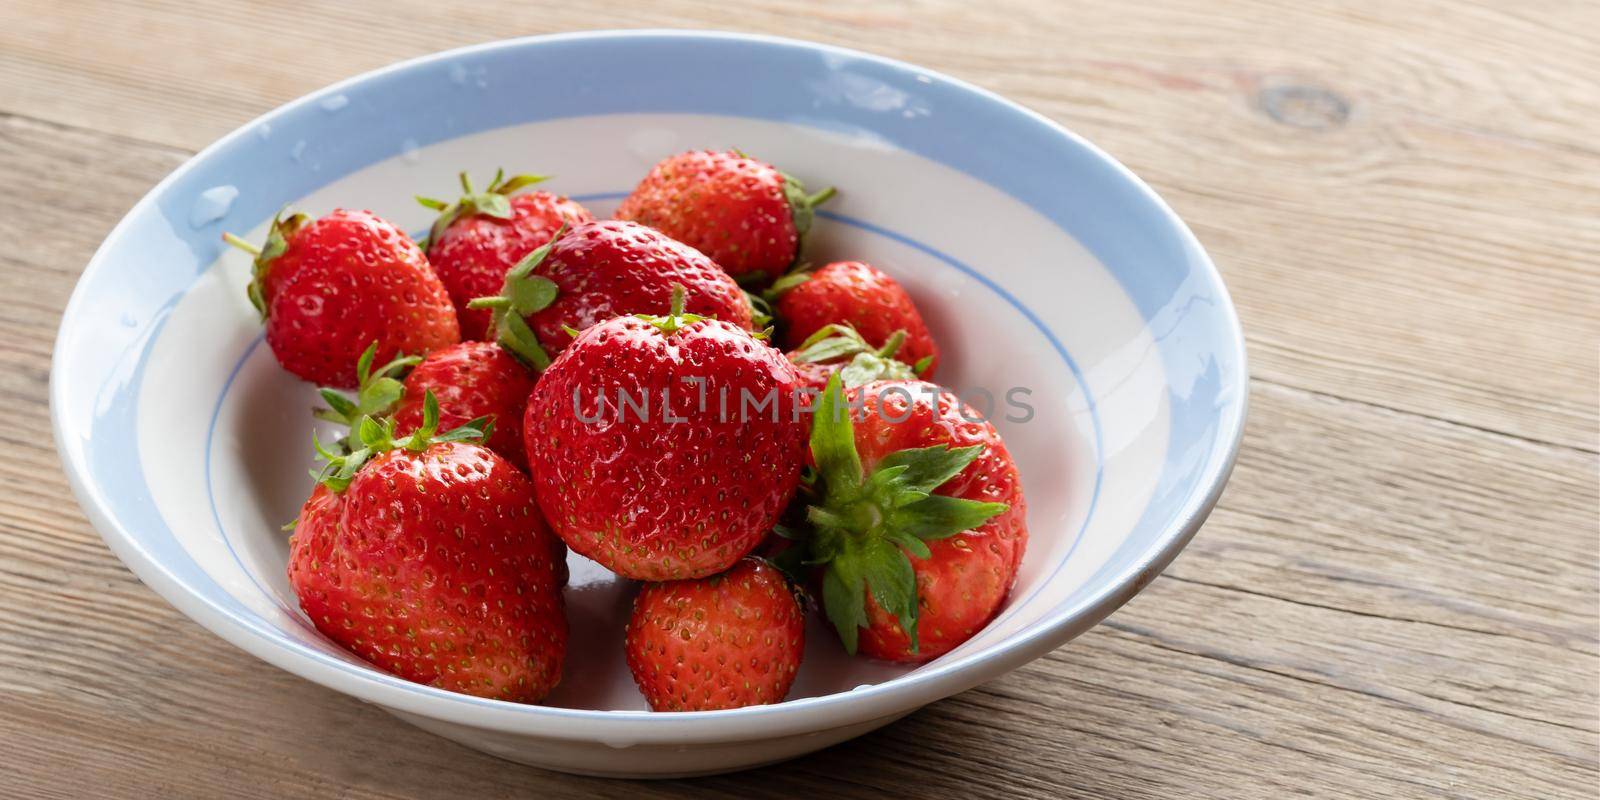 Natural ripe strawberries in a plain white bowl on a wooden table.